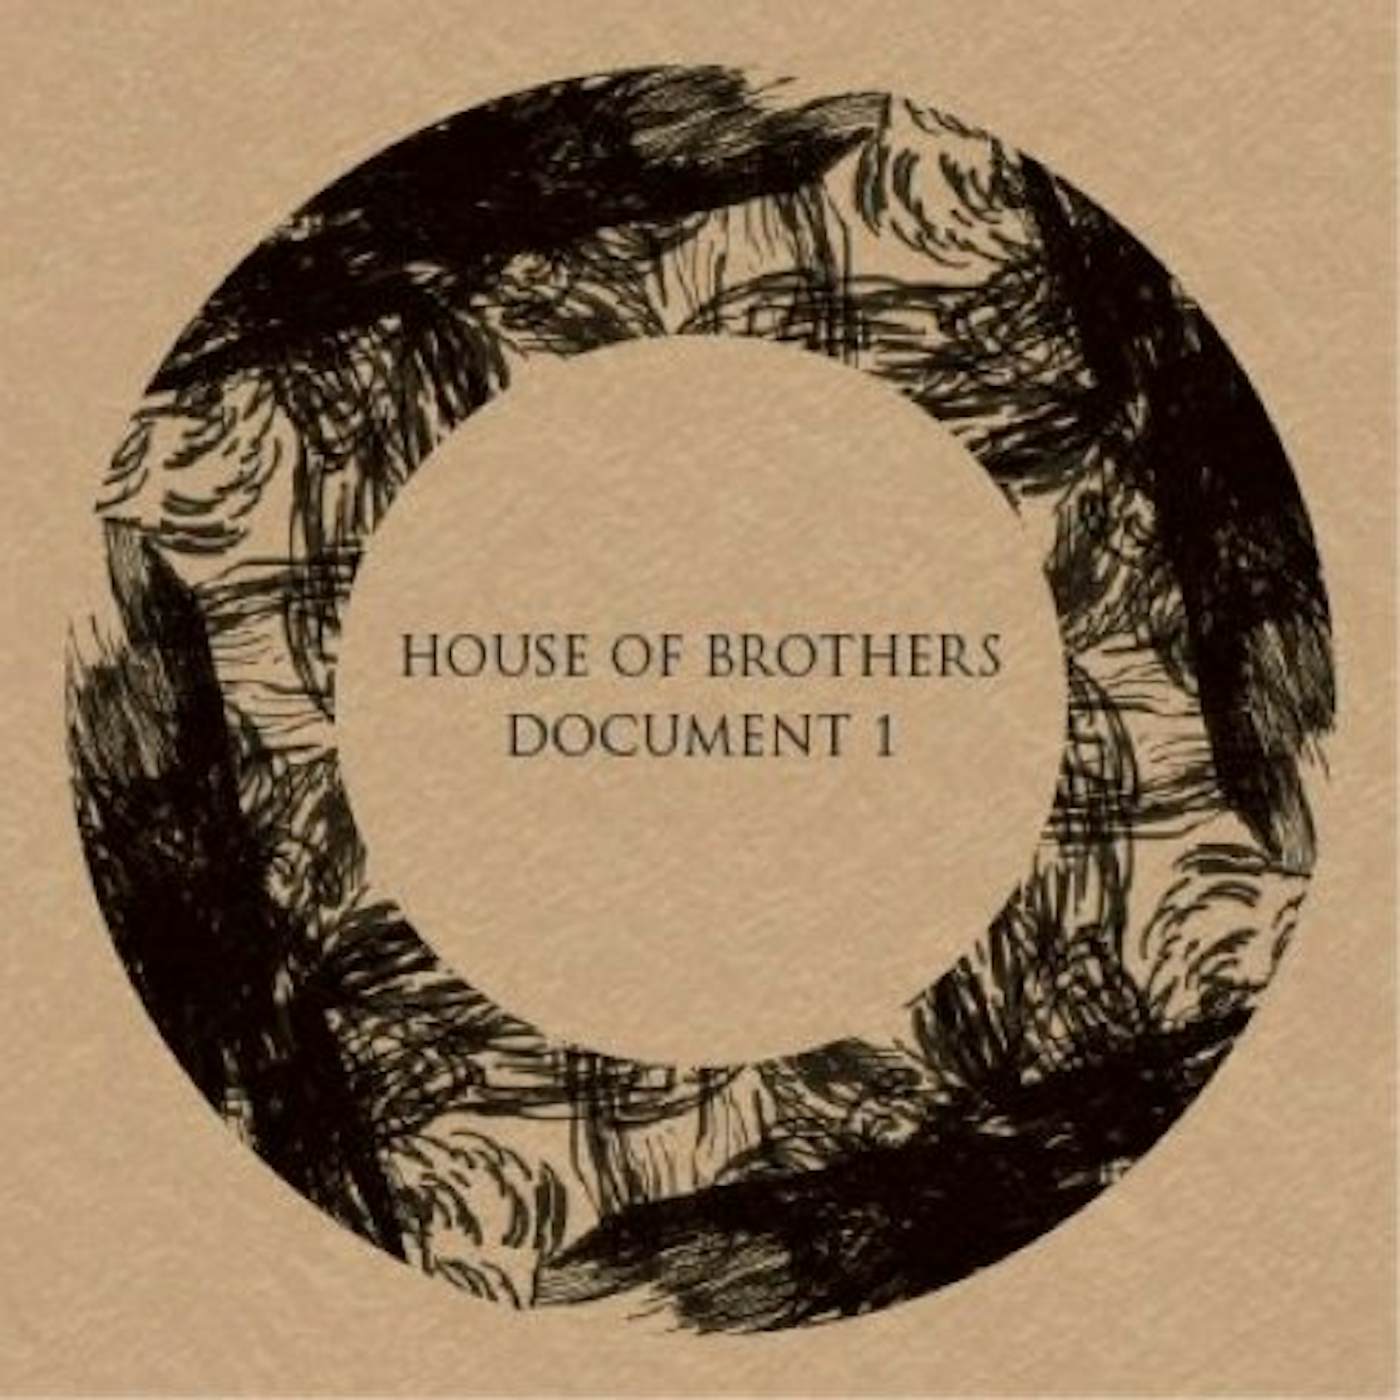 House of Brothers Document 1 Vinyl Record